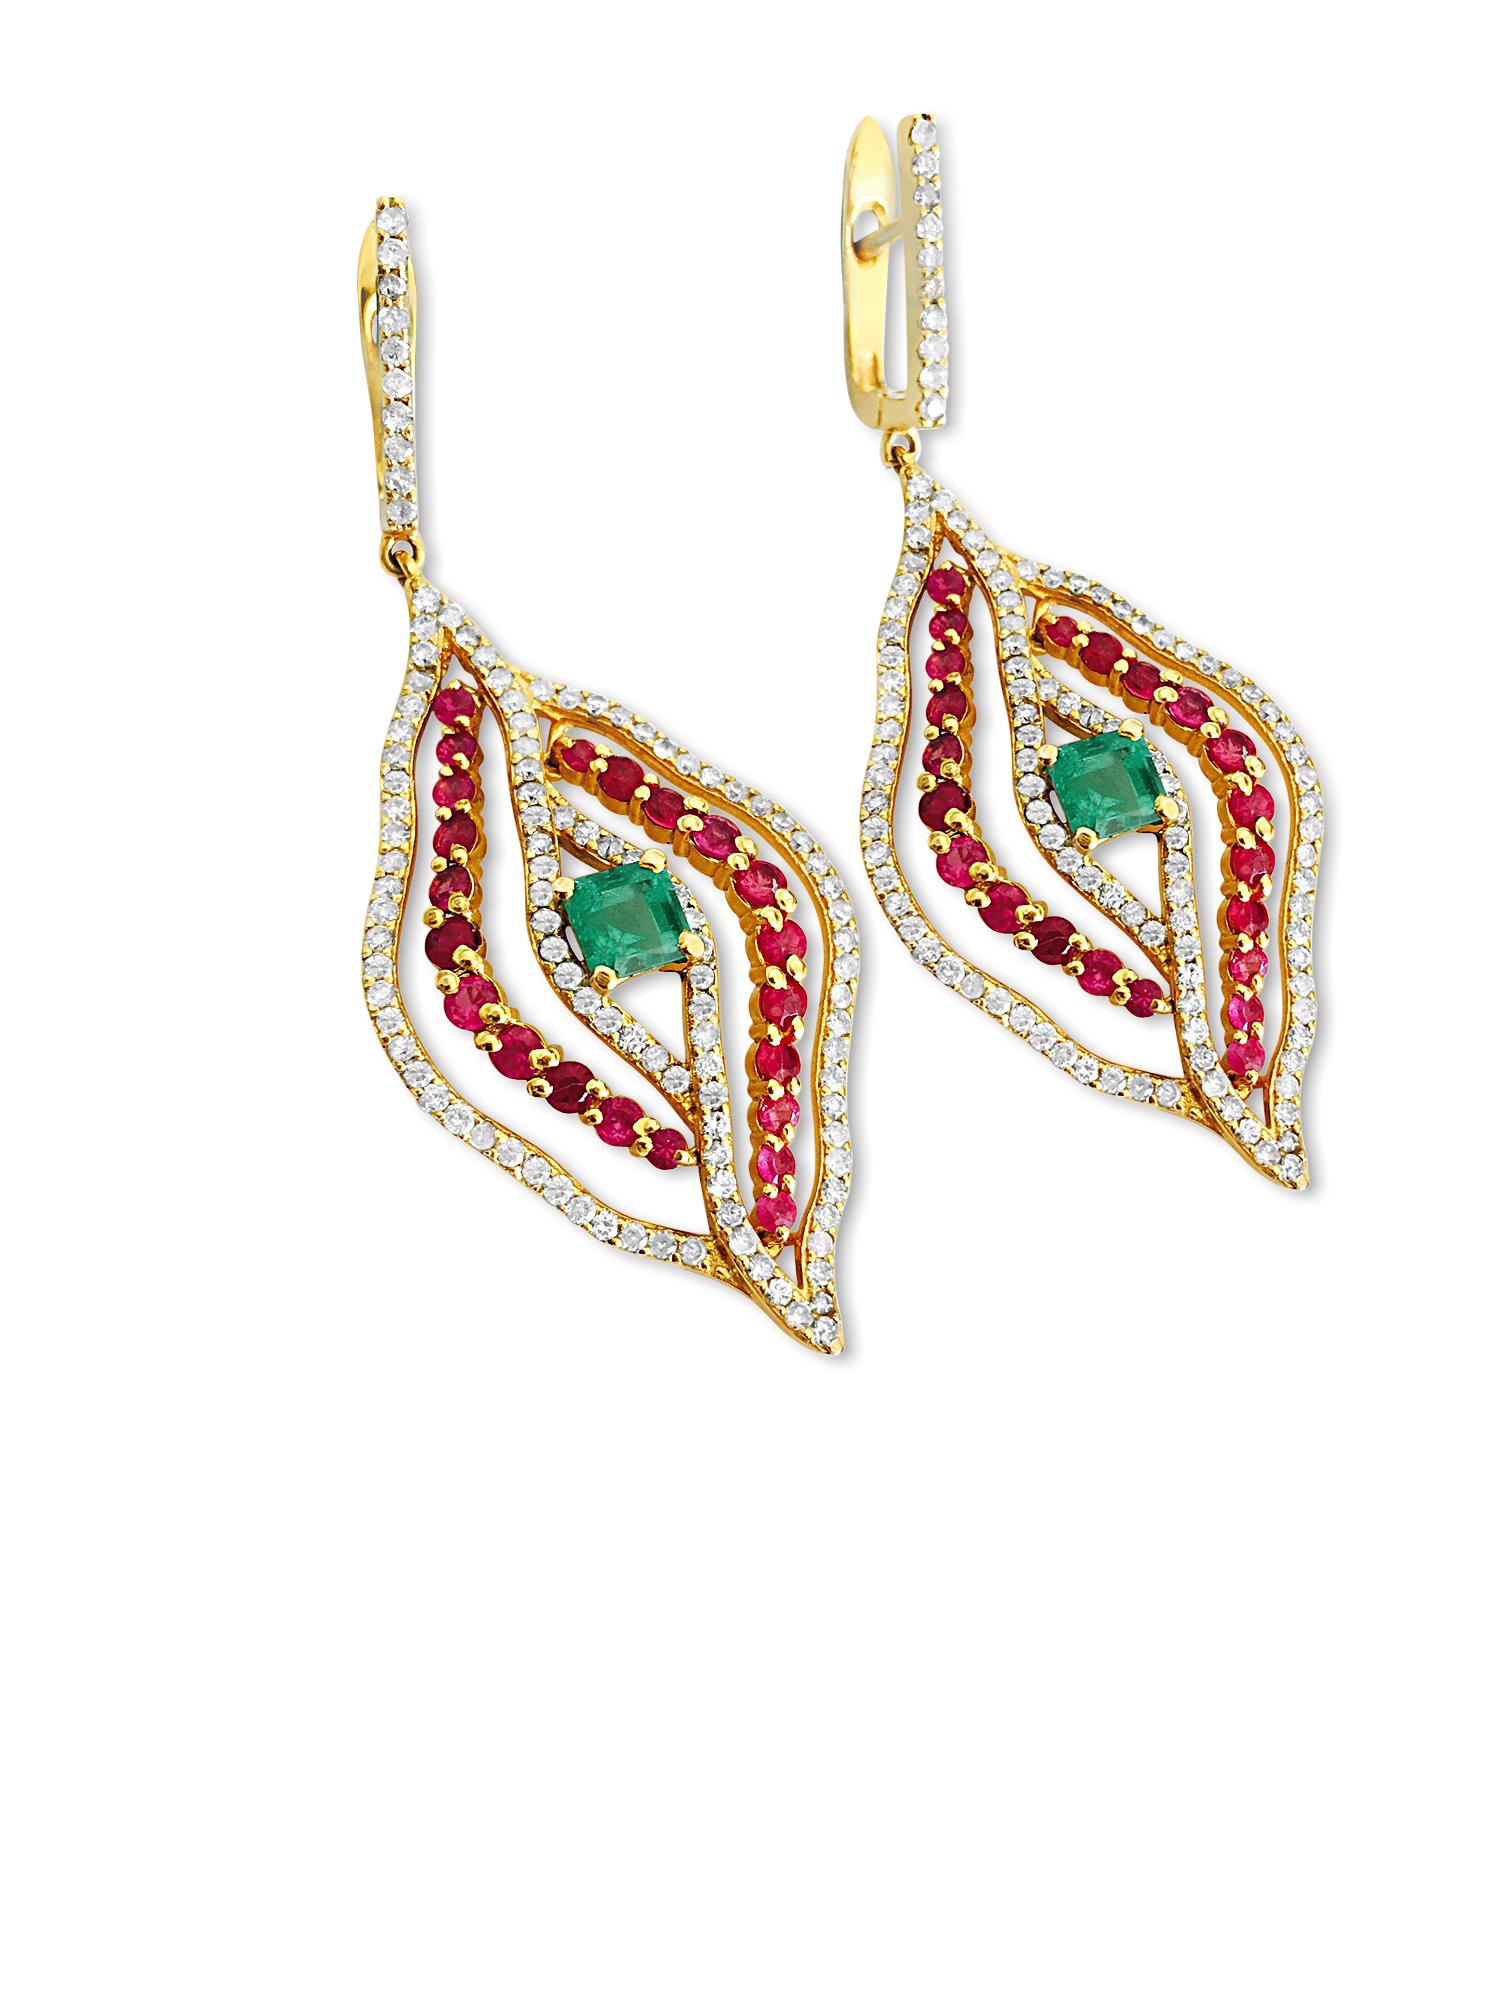 Brilliant Cut 14k Gold 6 carat Diamond Emerald and Ruby Earrings For Sale